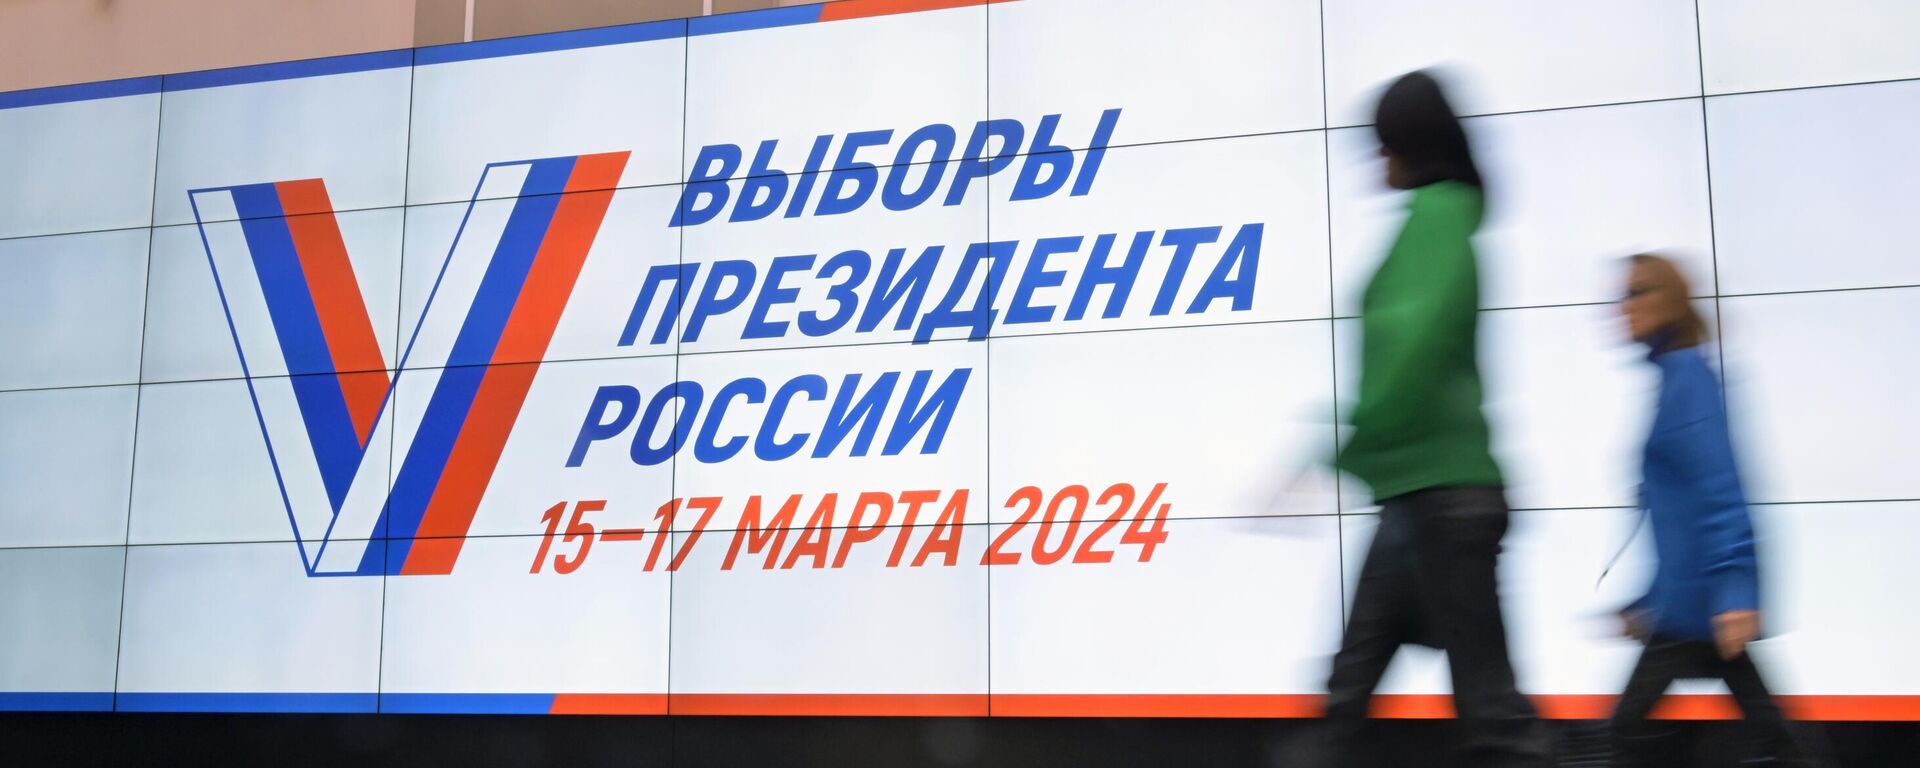 Russia is scheduled to hold its 2024 presidential election on March 15-17. - Sputnik भारत, 1920, 15.03.2024